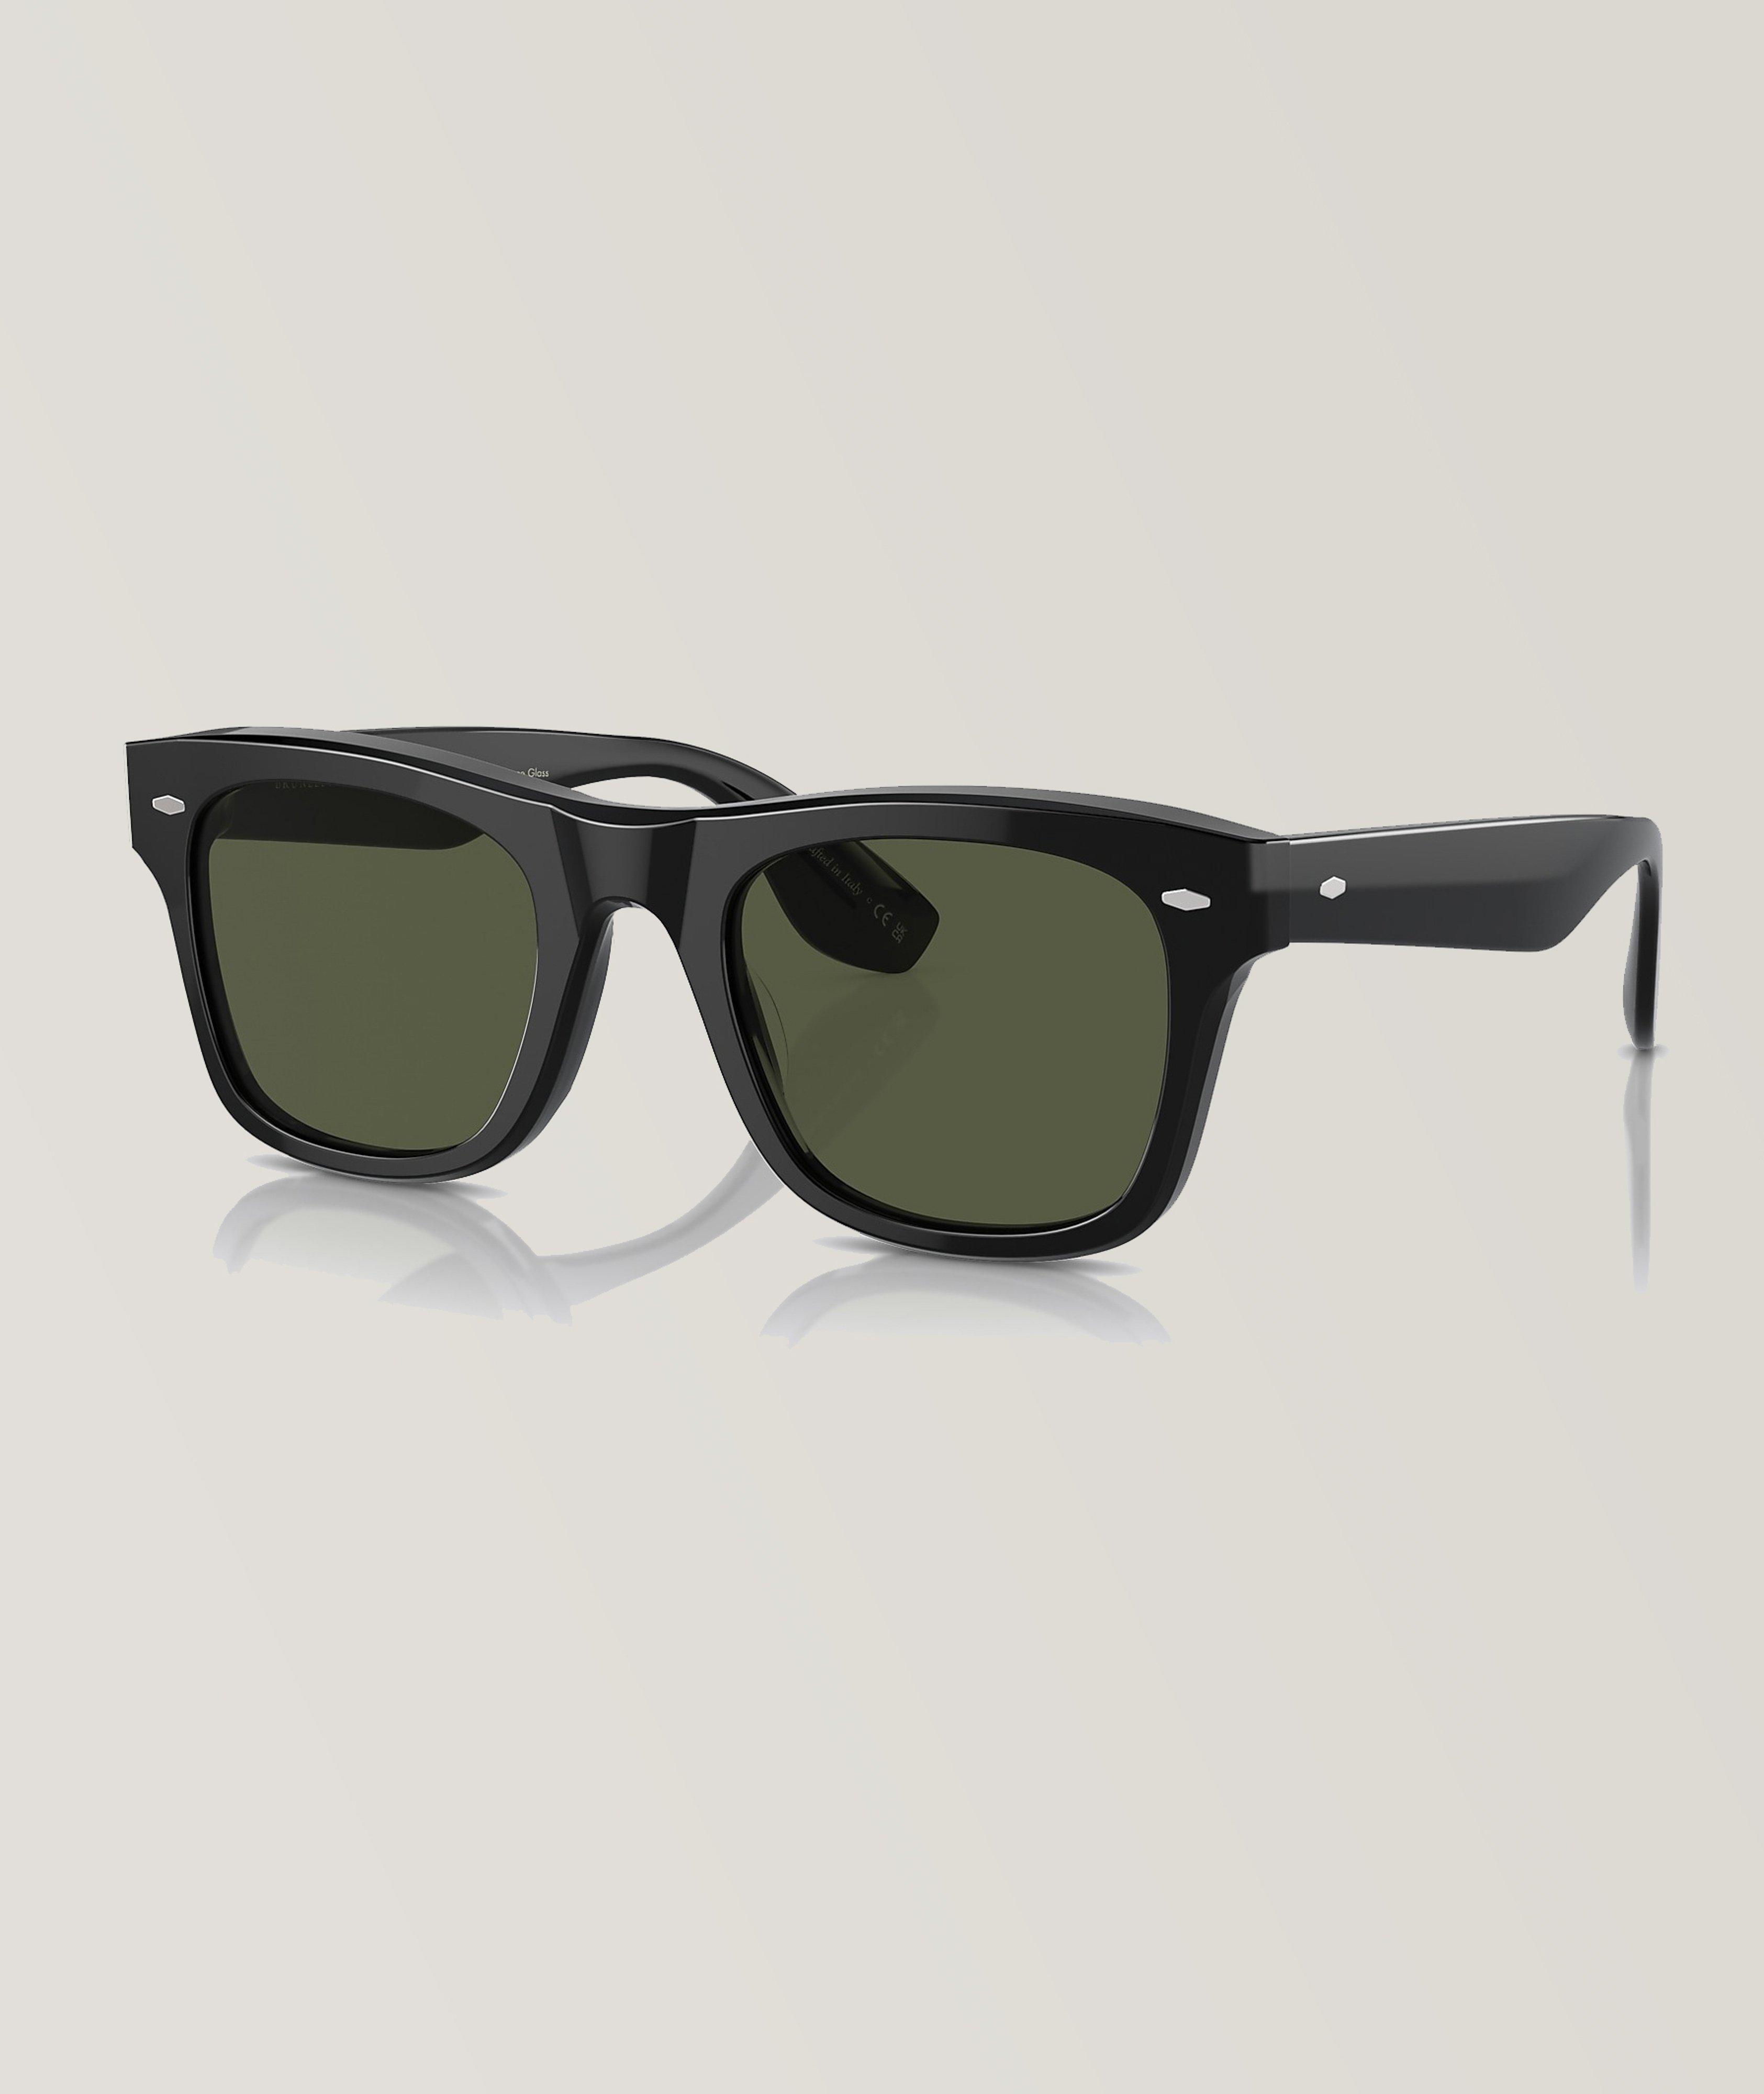 Oliver Peoples Collab Mister Bunello Sunglasses image 0